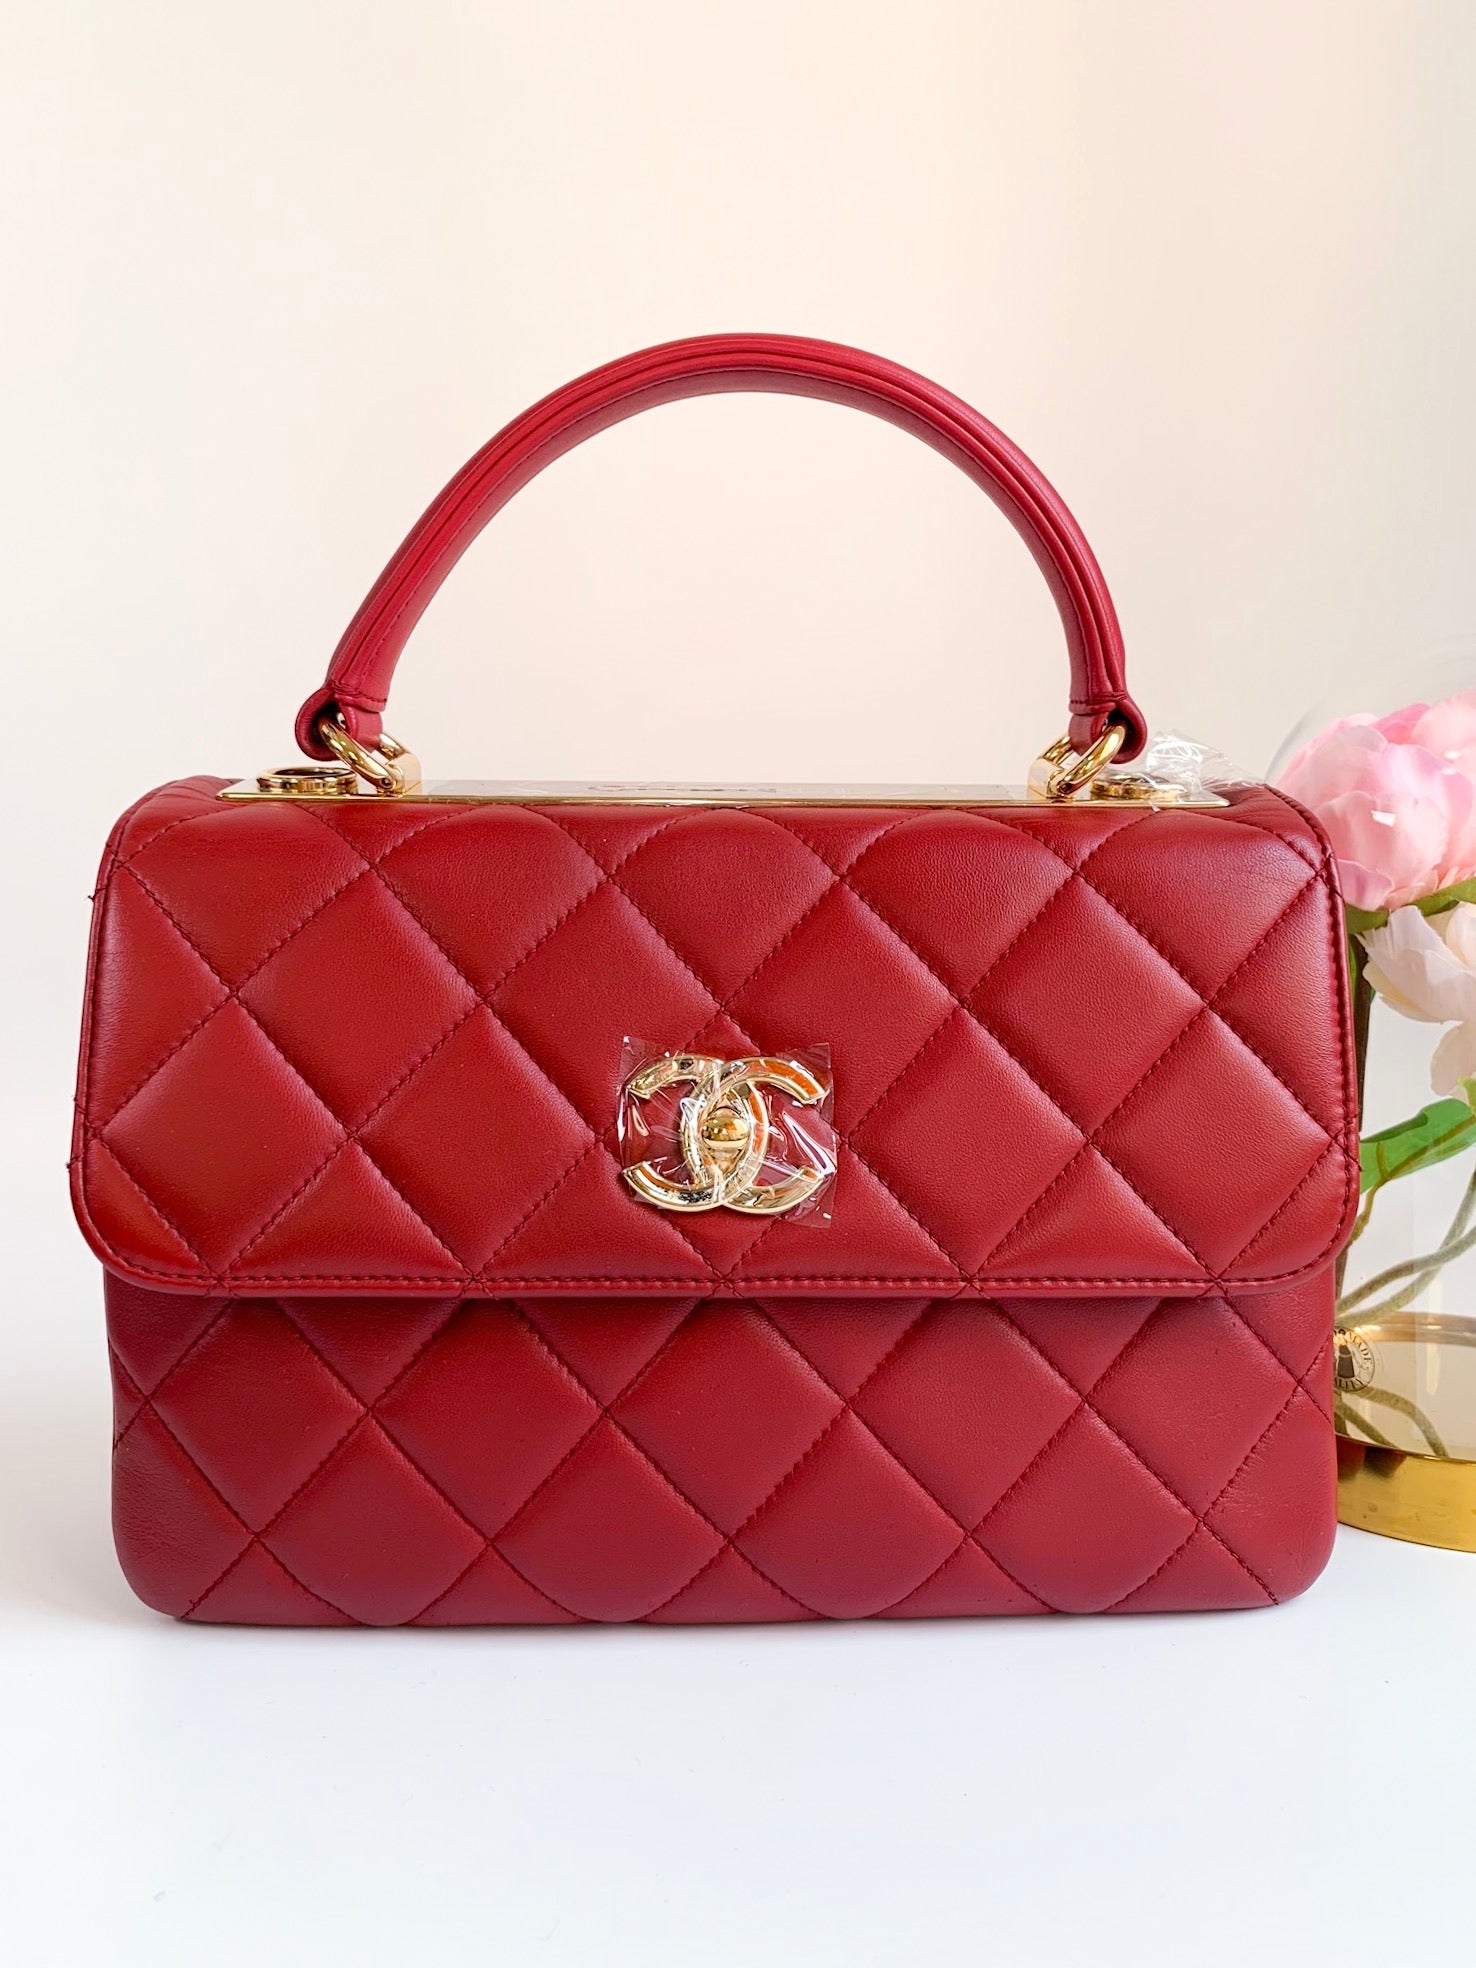 Chanel Red Lambskin Large Trendy CC Top Handle Flap Bag